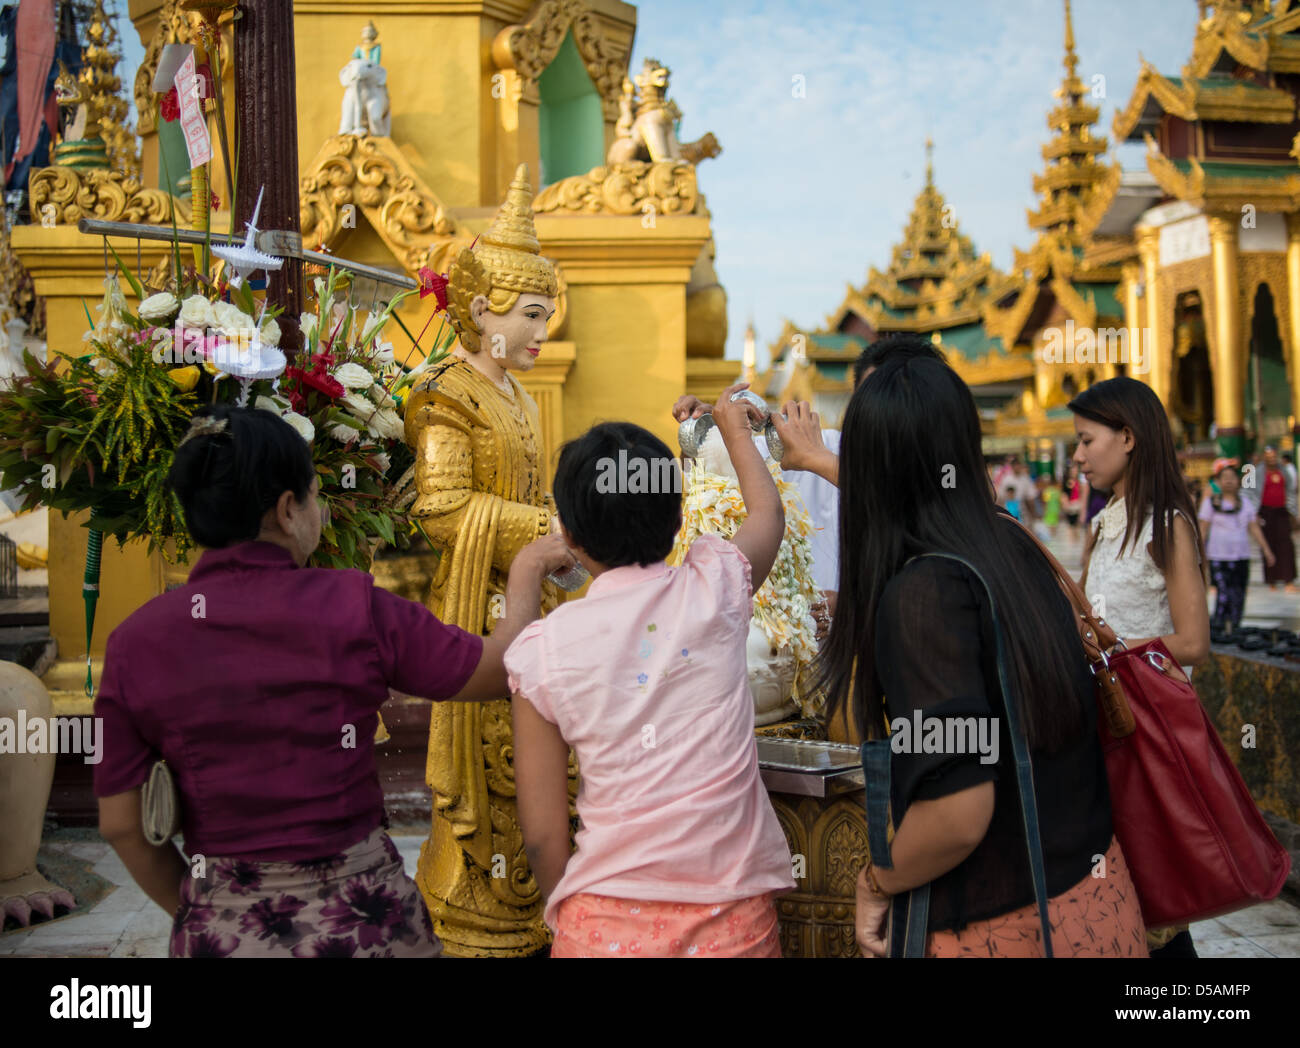 Buddhist worshipers poor water over Buddhas to wash away their own sins. Stock Photo